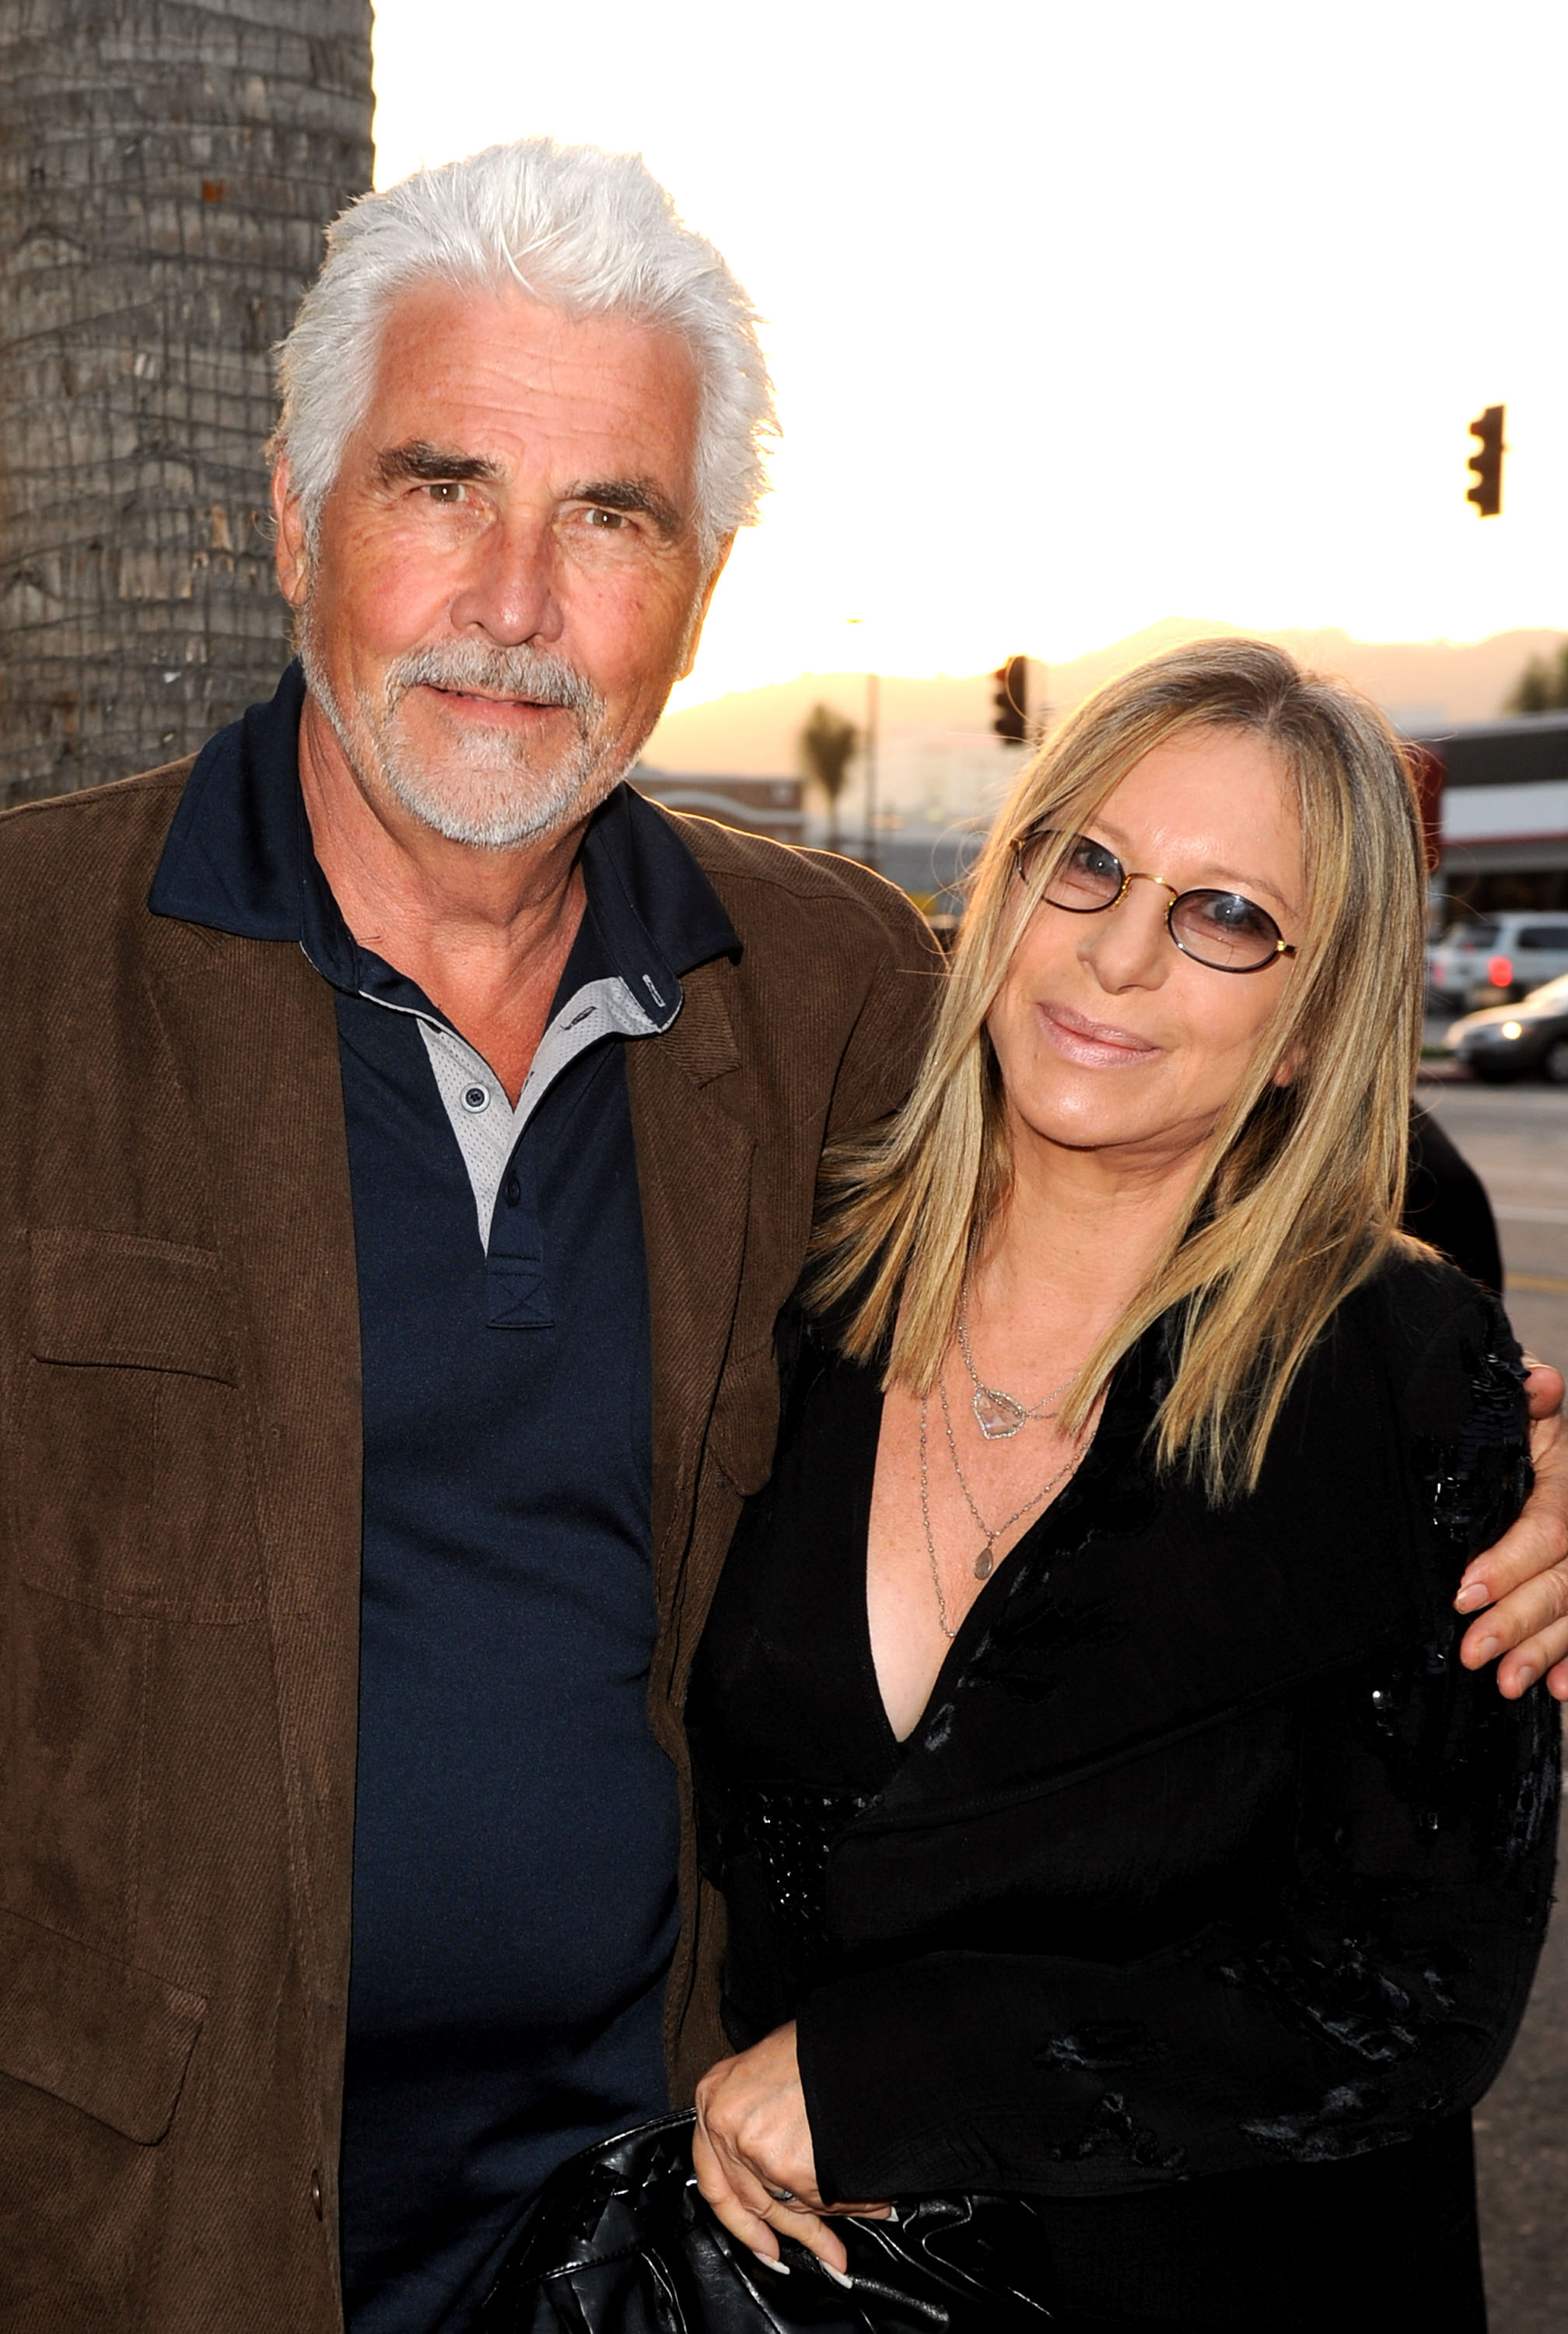 James Brolin and Barbra Streisand at premiere of "Jonah Hex," 2010 | Source: Getty Images